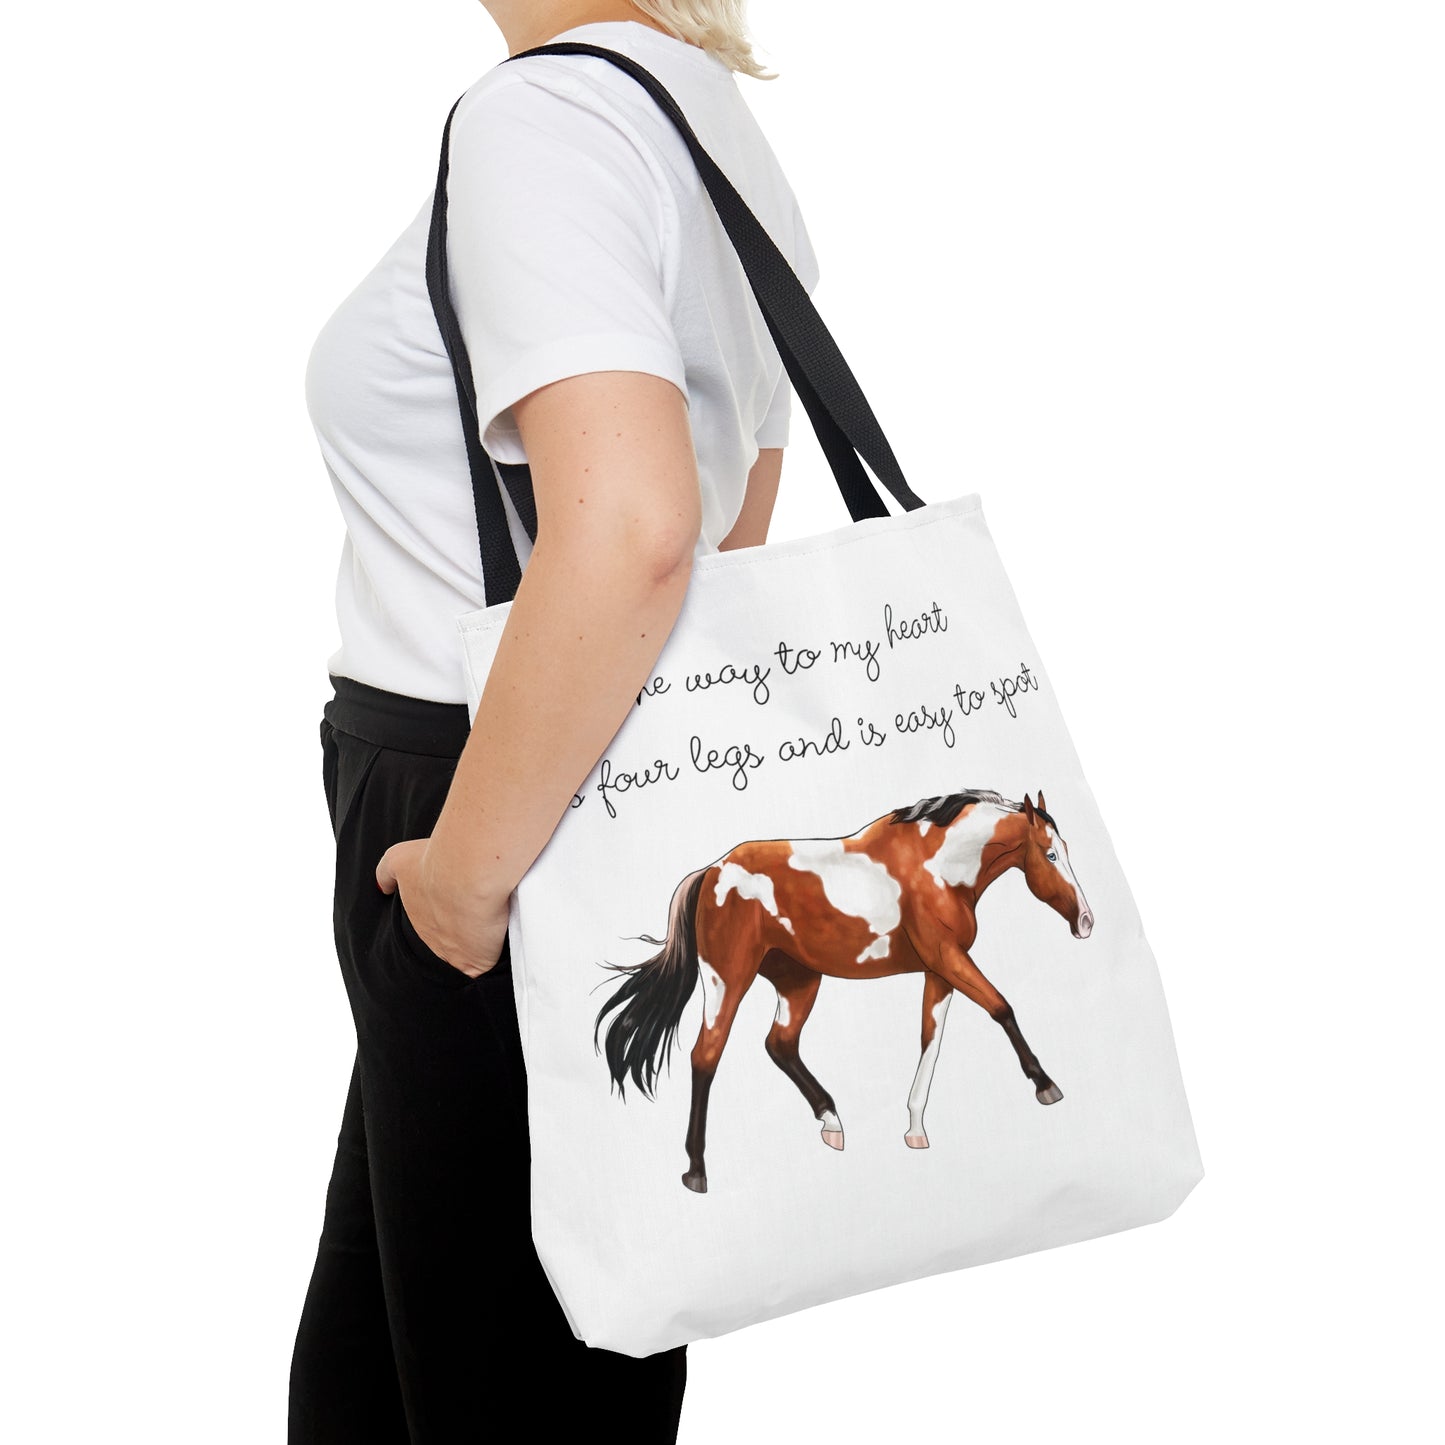 The Way to my Heart - Paint - Tote Bag